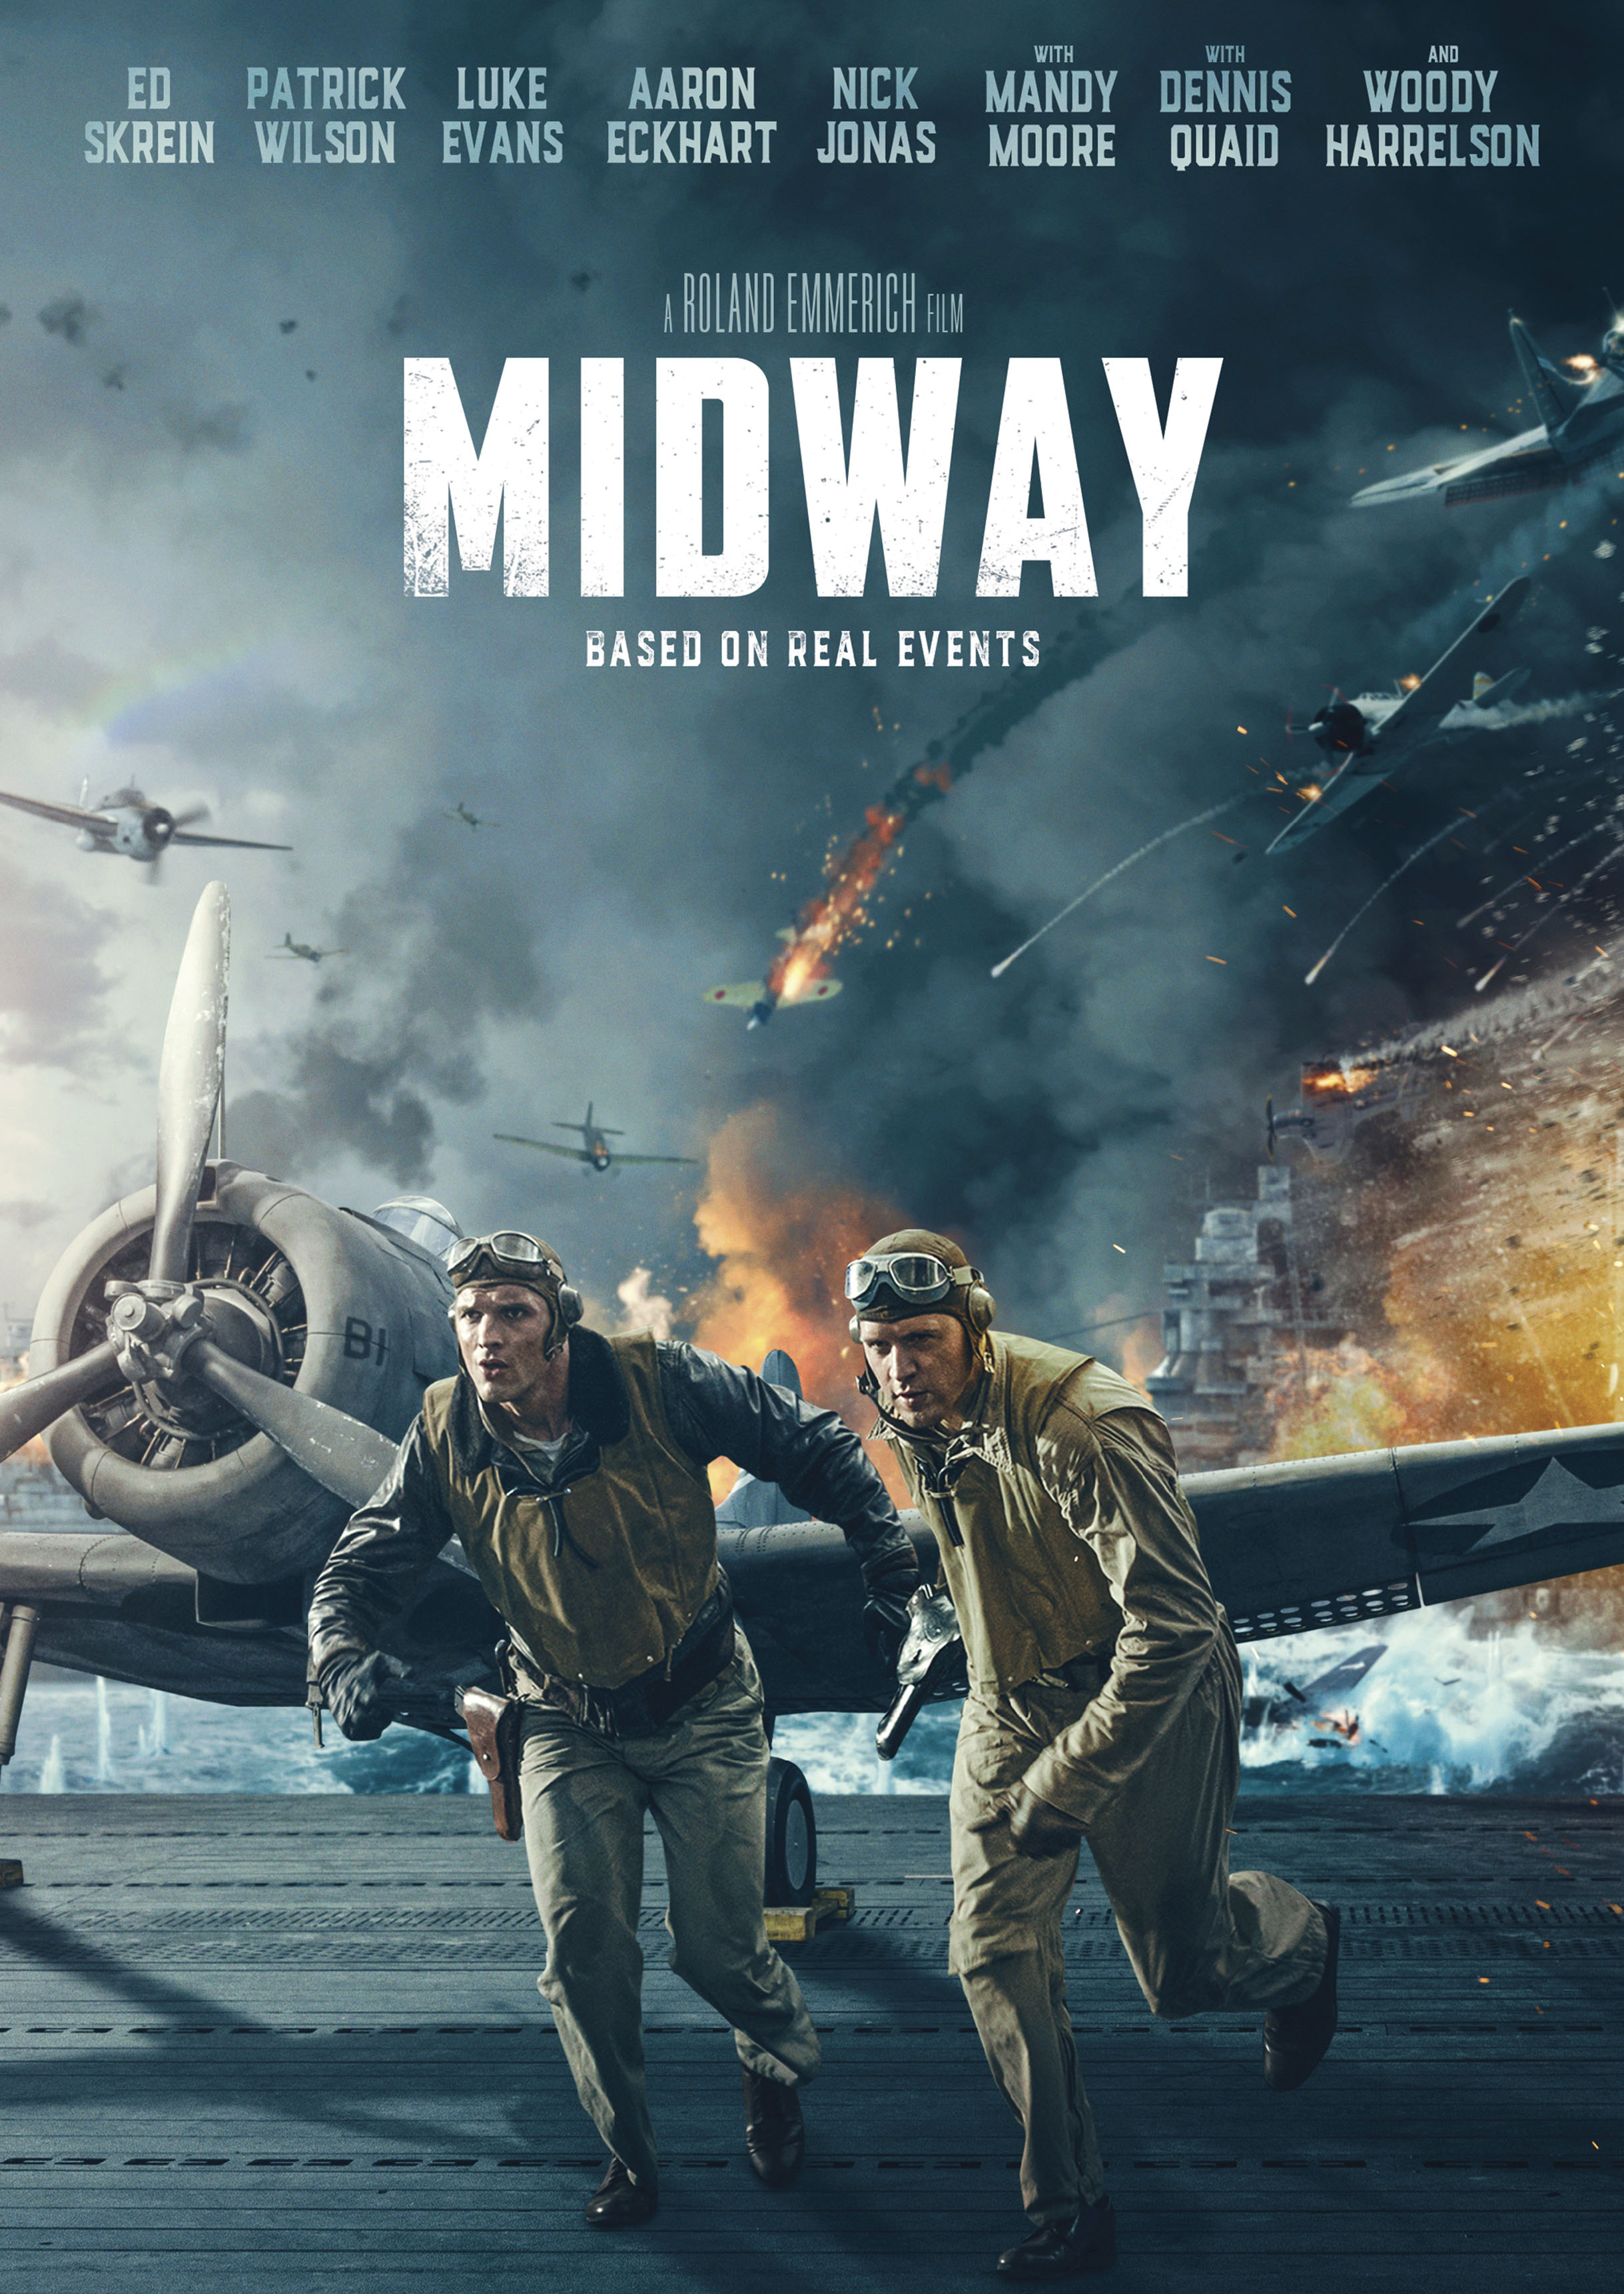 Midway DVD cover.